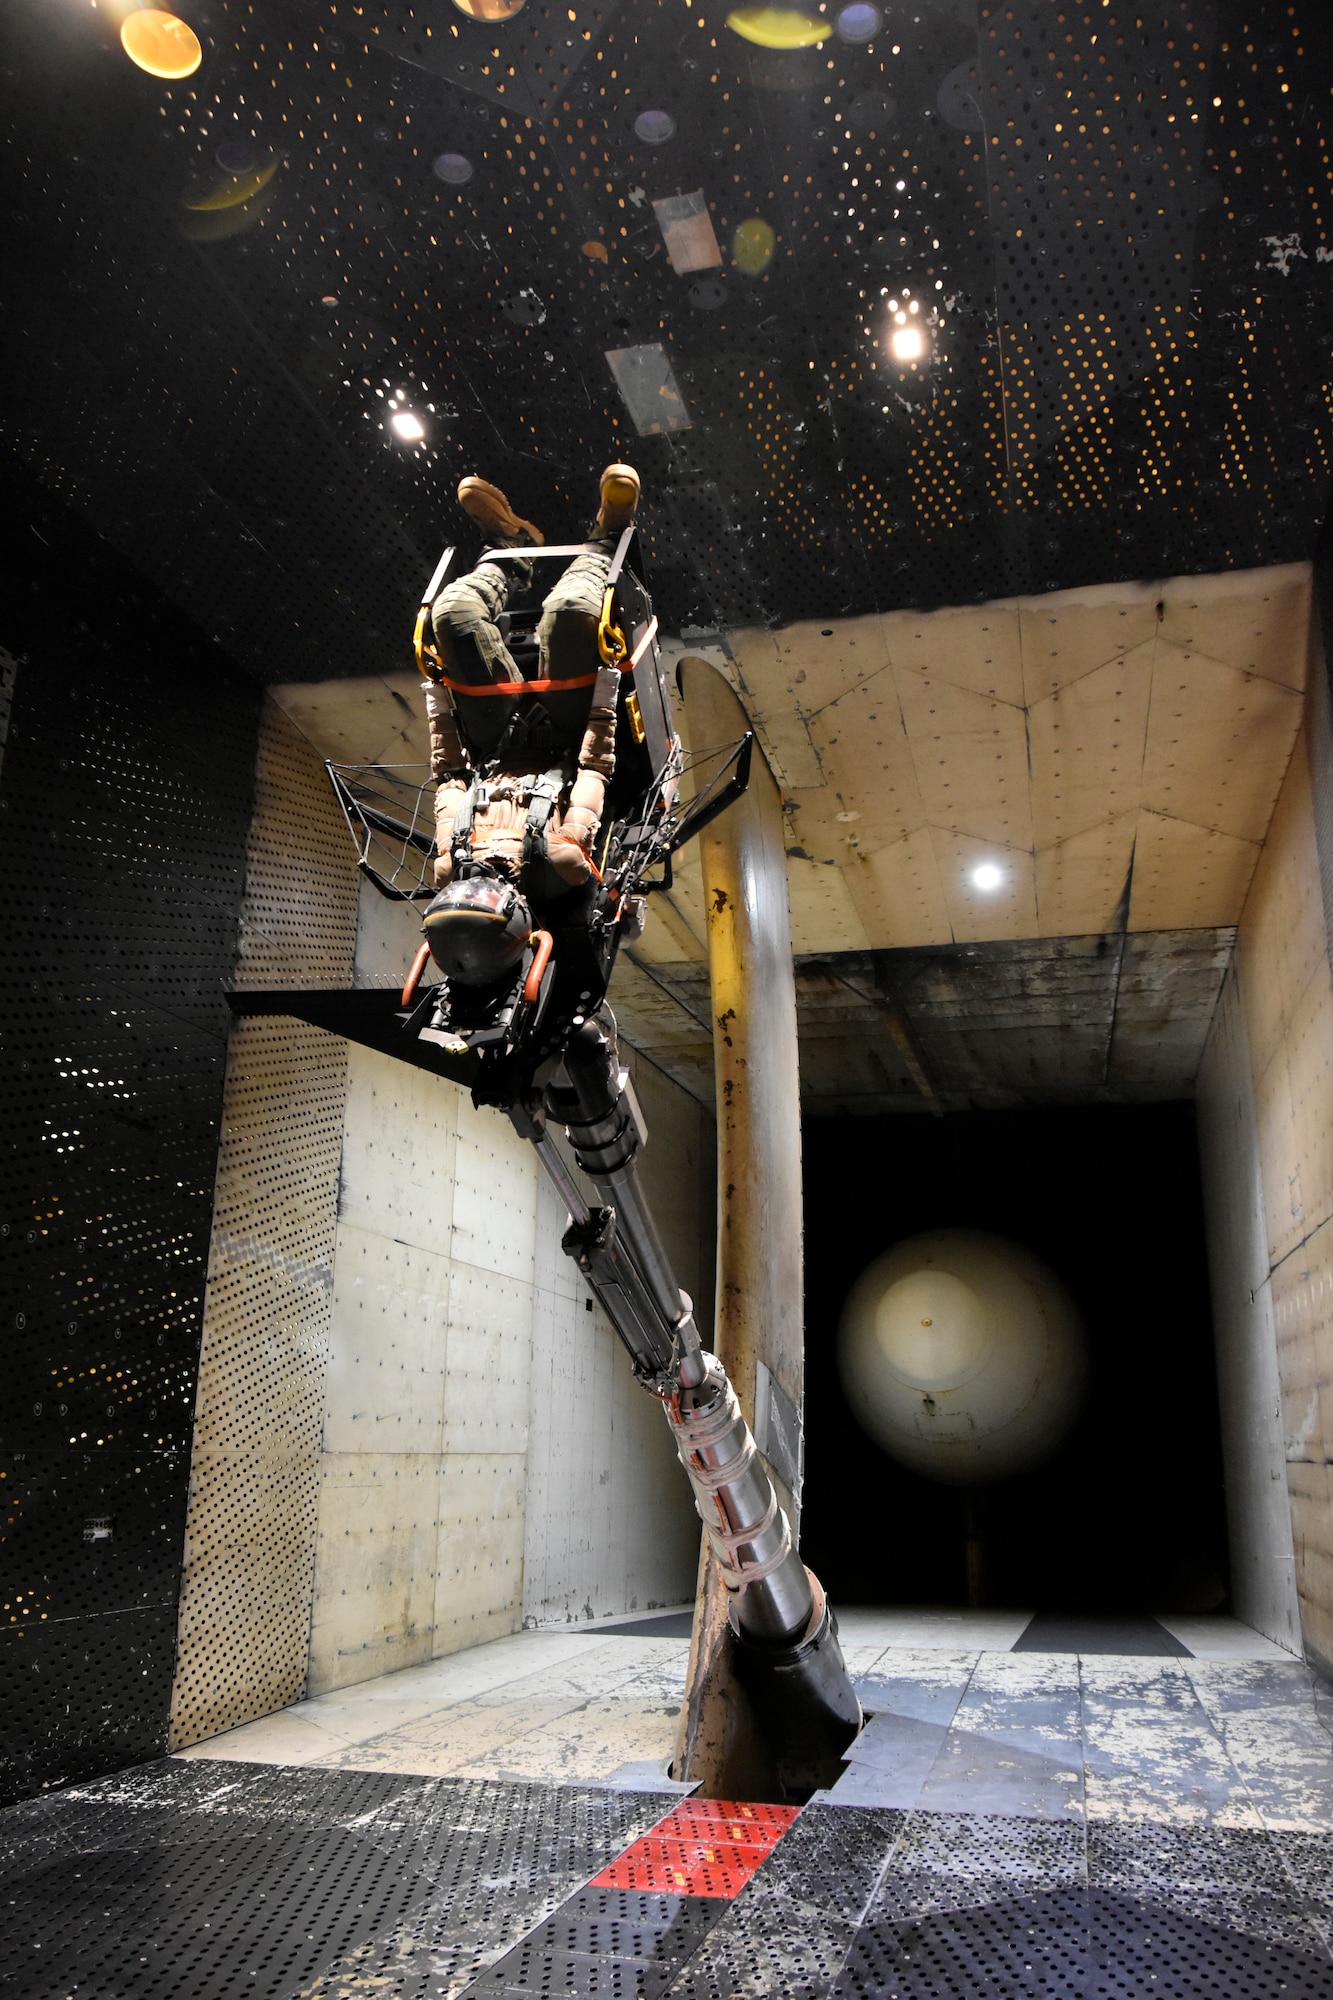 A variation of the ACES V ejection seat is shown in one of the wind tunnels at Arnold Air Force Base, Tenn., Sept. 5, 2023. Ejection seat testing was recently conducted at Arnold for the first time since 1997. The most recent effort involved testing on three variations of the ACES V seat. (U.S. Air Force photo by Bradley Hicks)